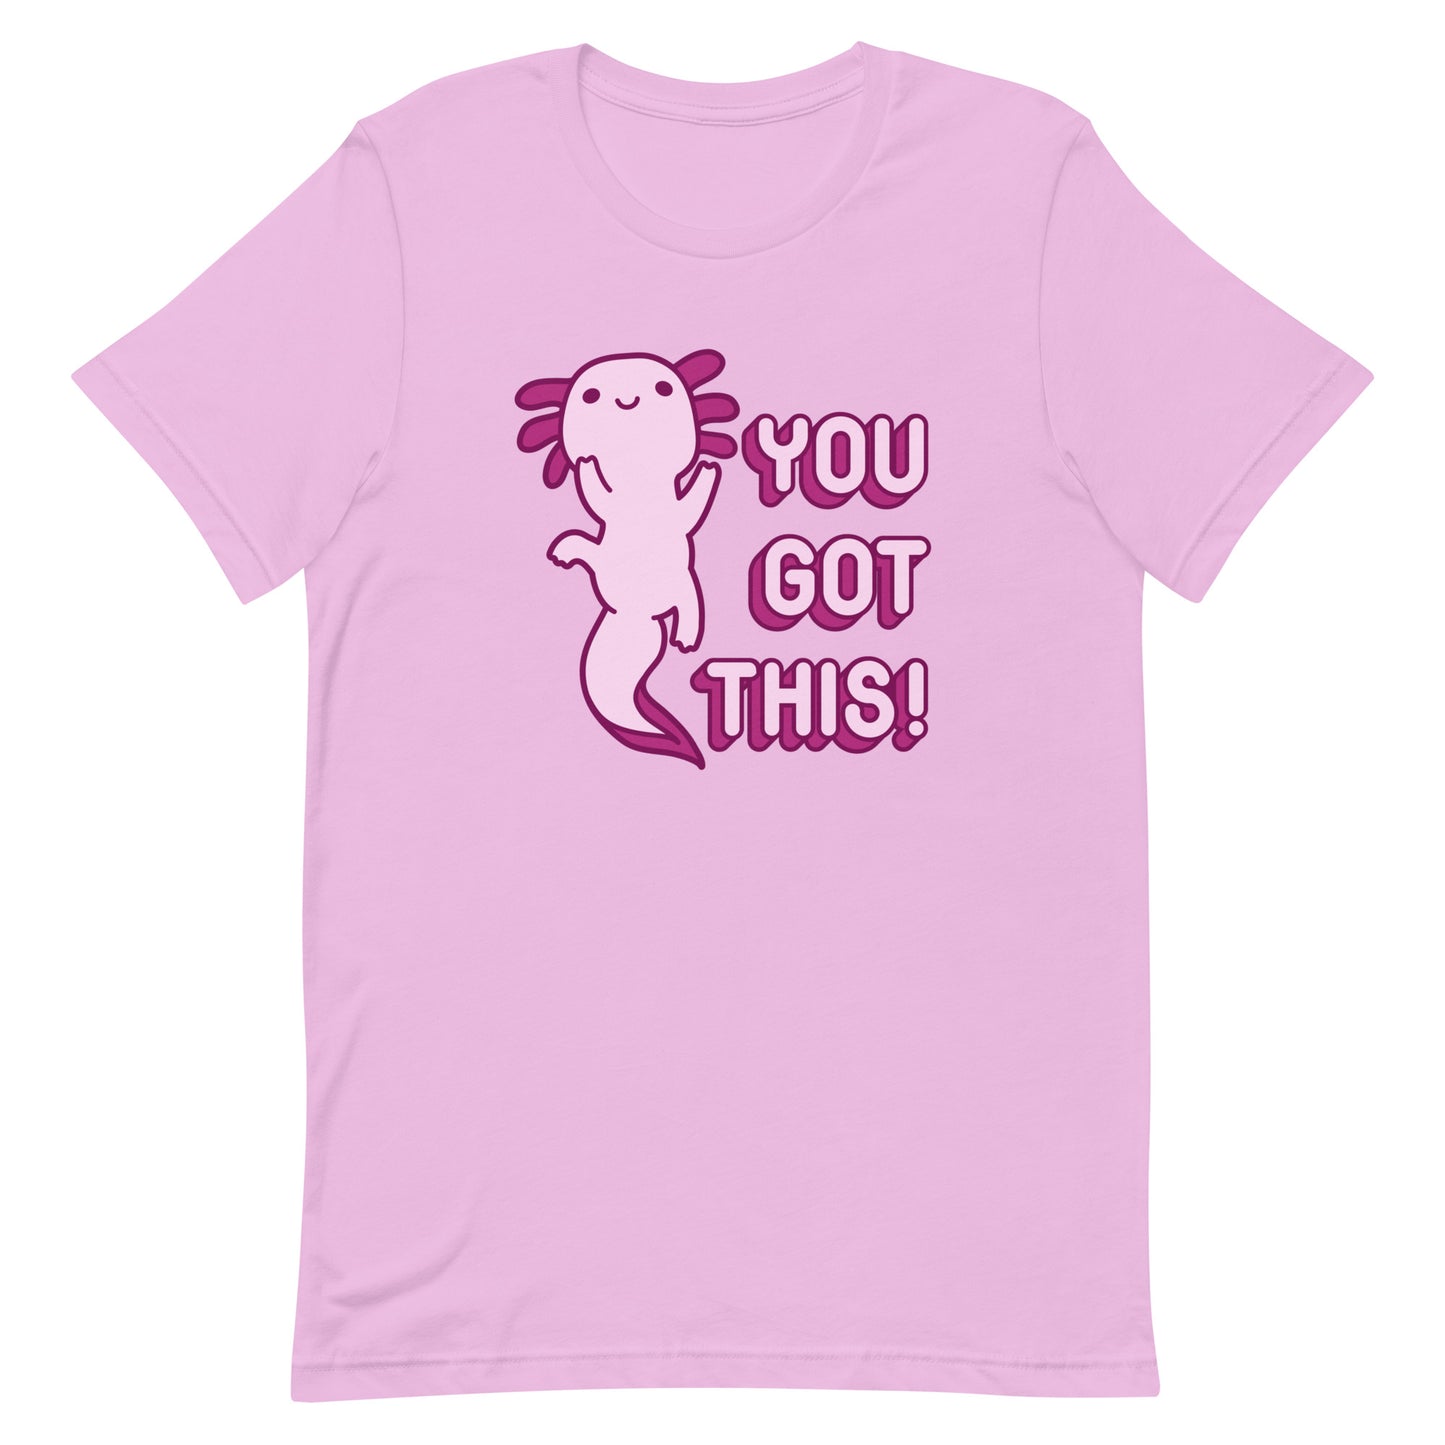 A light pink t-shirt featuring a smiling axolotl and pink bubble letters that read "You got this!"